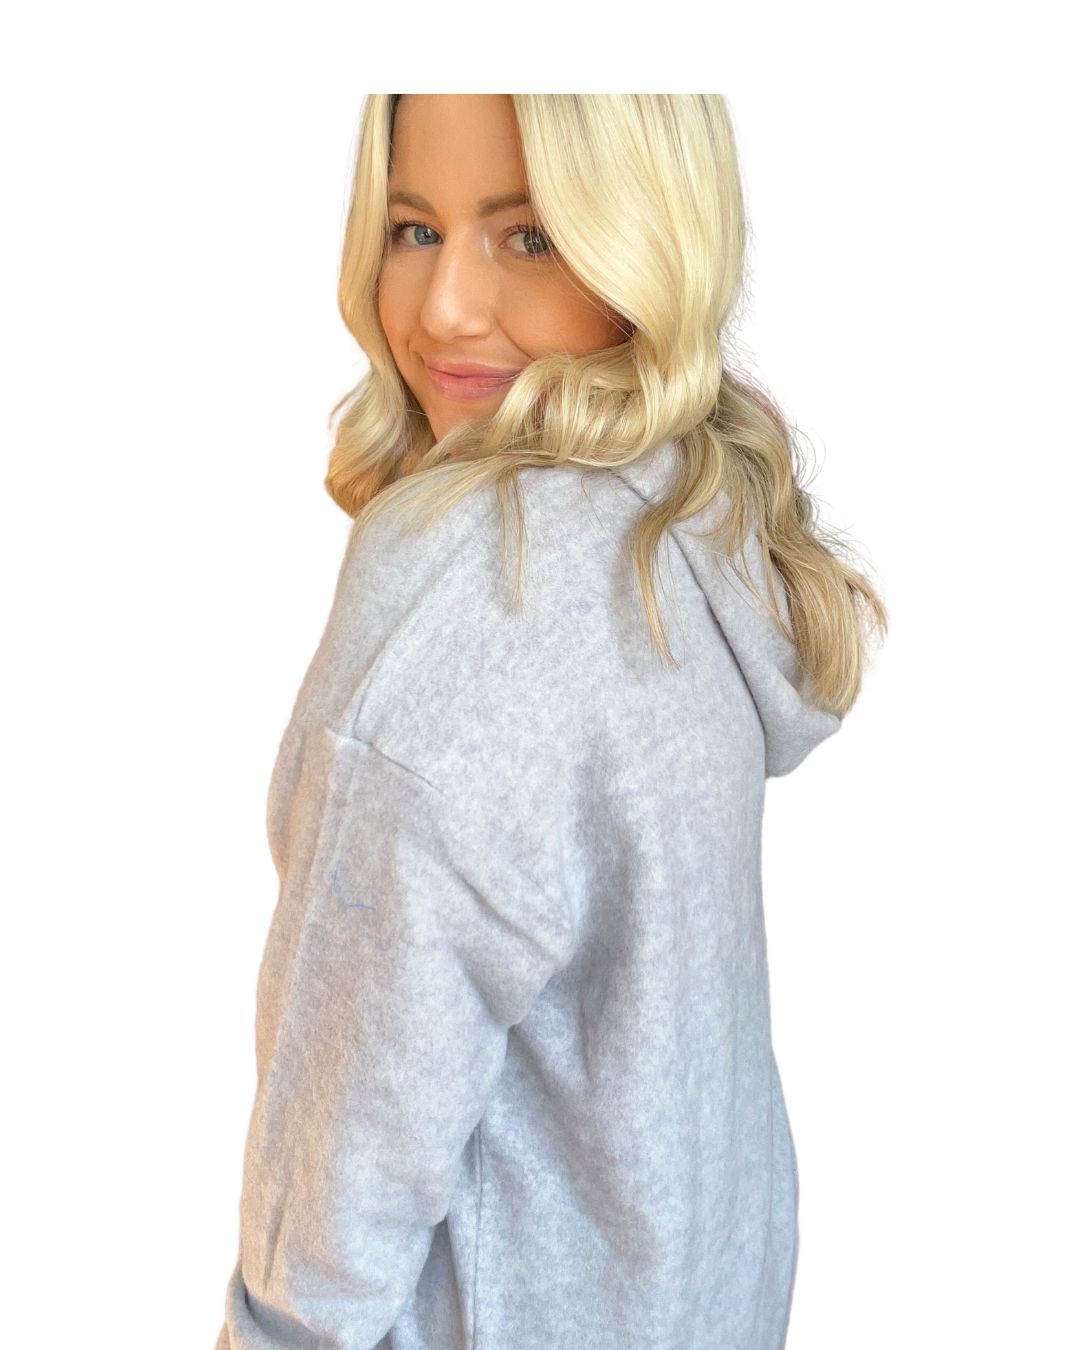 heather hooded sweater